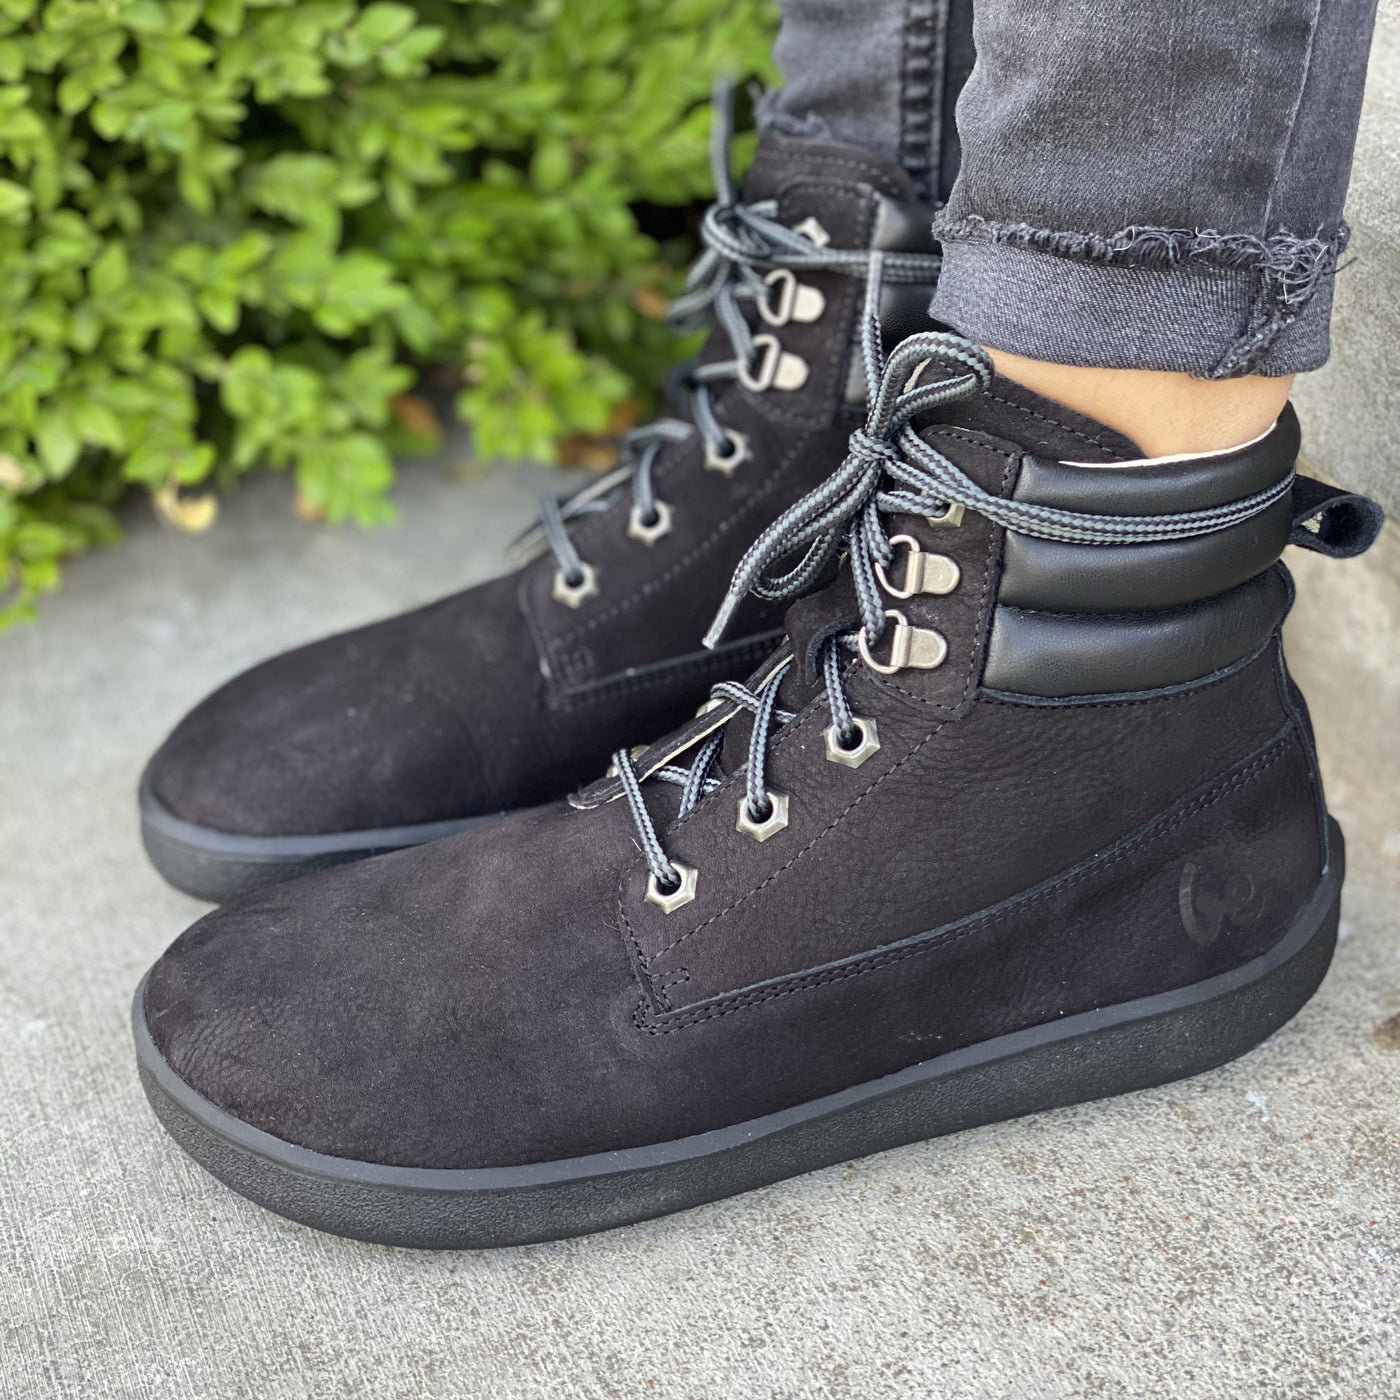 A photo of Be Lenka Nevada Boots made from nubuck leather and rubber soles. The boots are black in color, they are combat boot style with laces a padded color and a chunky eyelets. A woman is shown standing to the left on concrete from mid leg down wearing dark gray rolled jeans and the Nevada boots greenery is in the background. #color_black